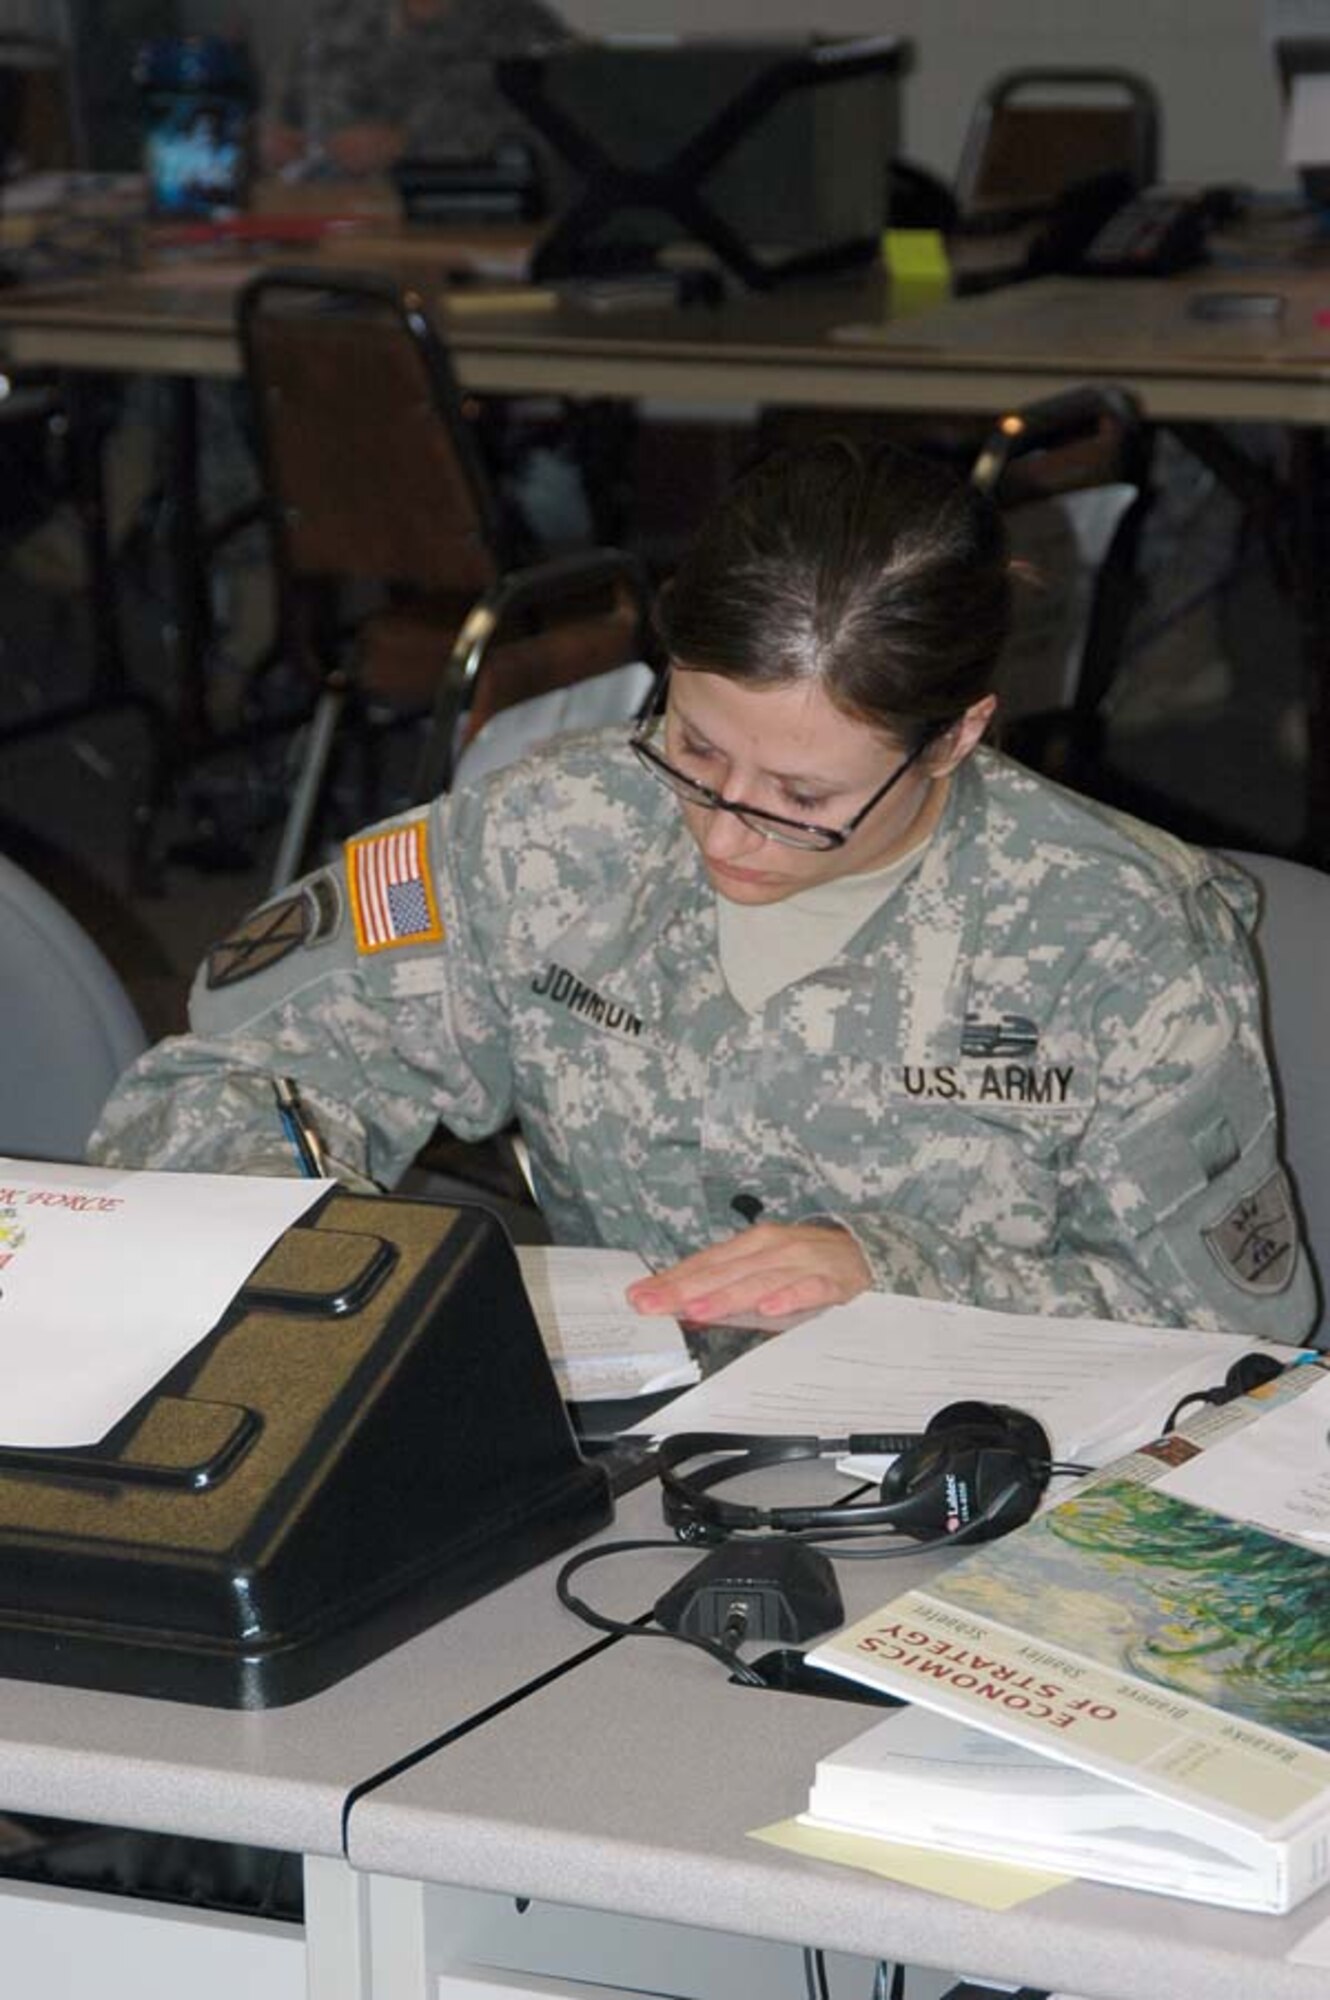 Spc. Danielle Y. Johnson, a member of the 1-188th Air Defense Artillery, studies during down time at the Grand Forks Armed Forces Reserve Center. Johnson is a political science major at North Dakota State University in Fargo, N.D.  
